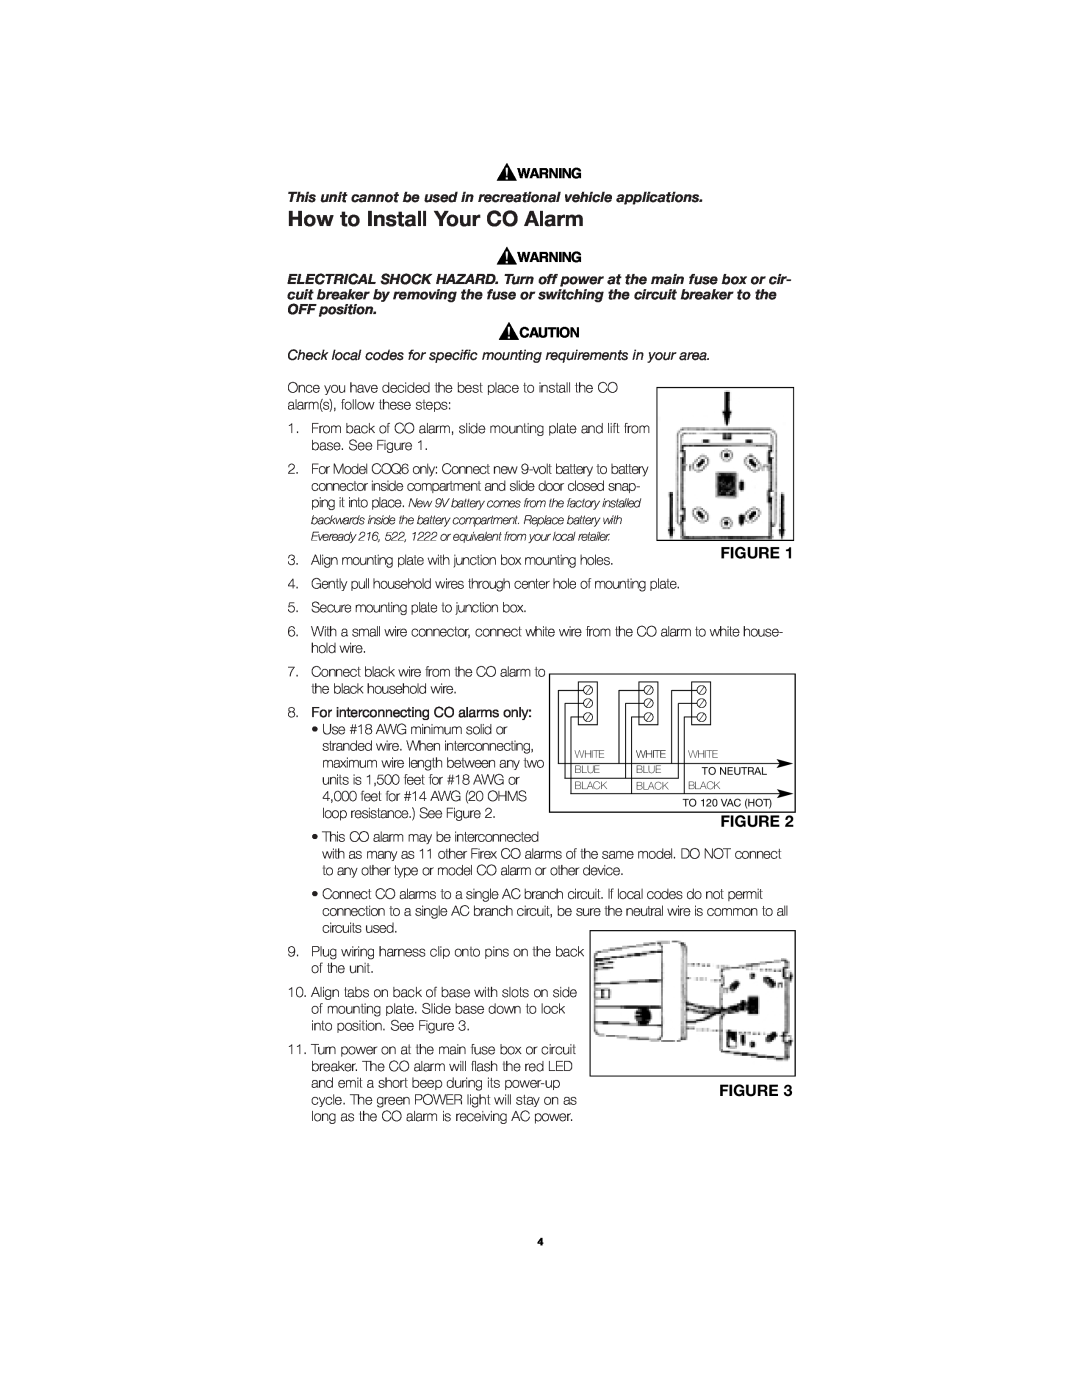 Firex COQ6, COQ3 owner manual How to Install Your CO Alarm 